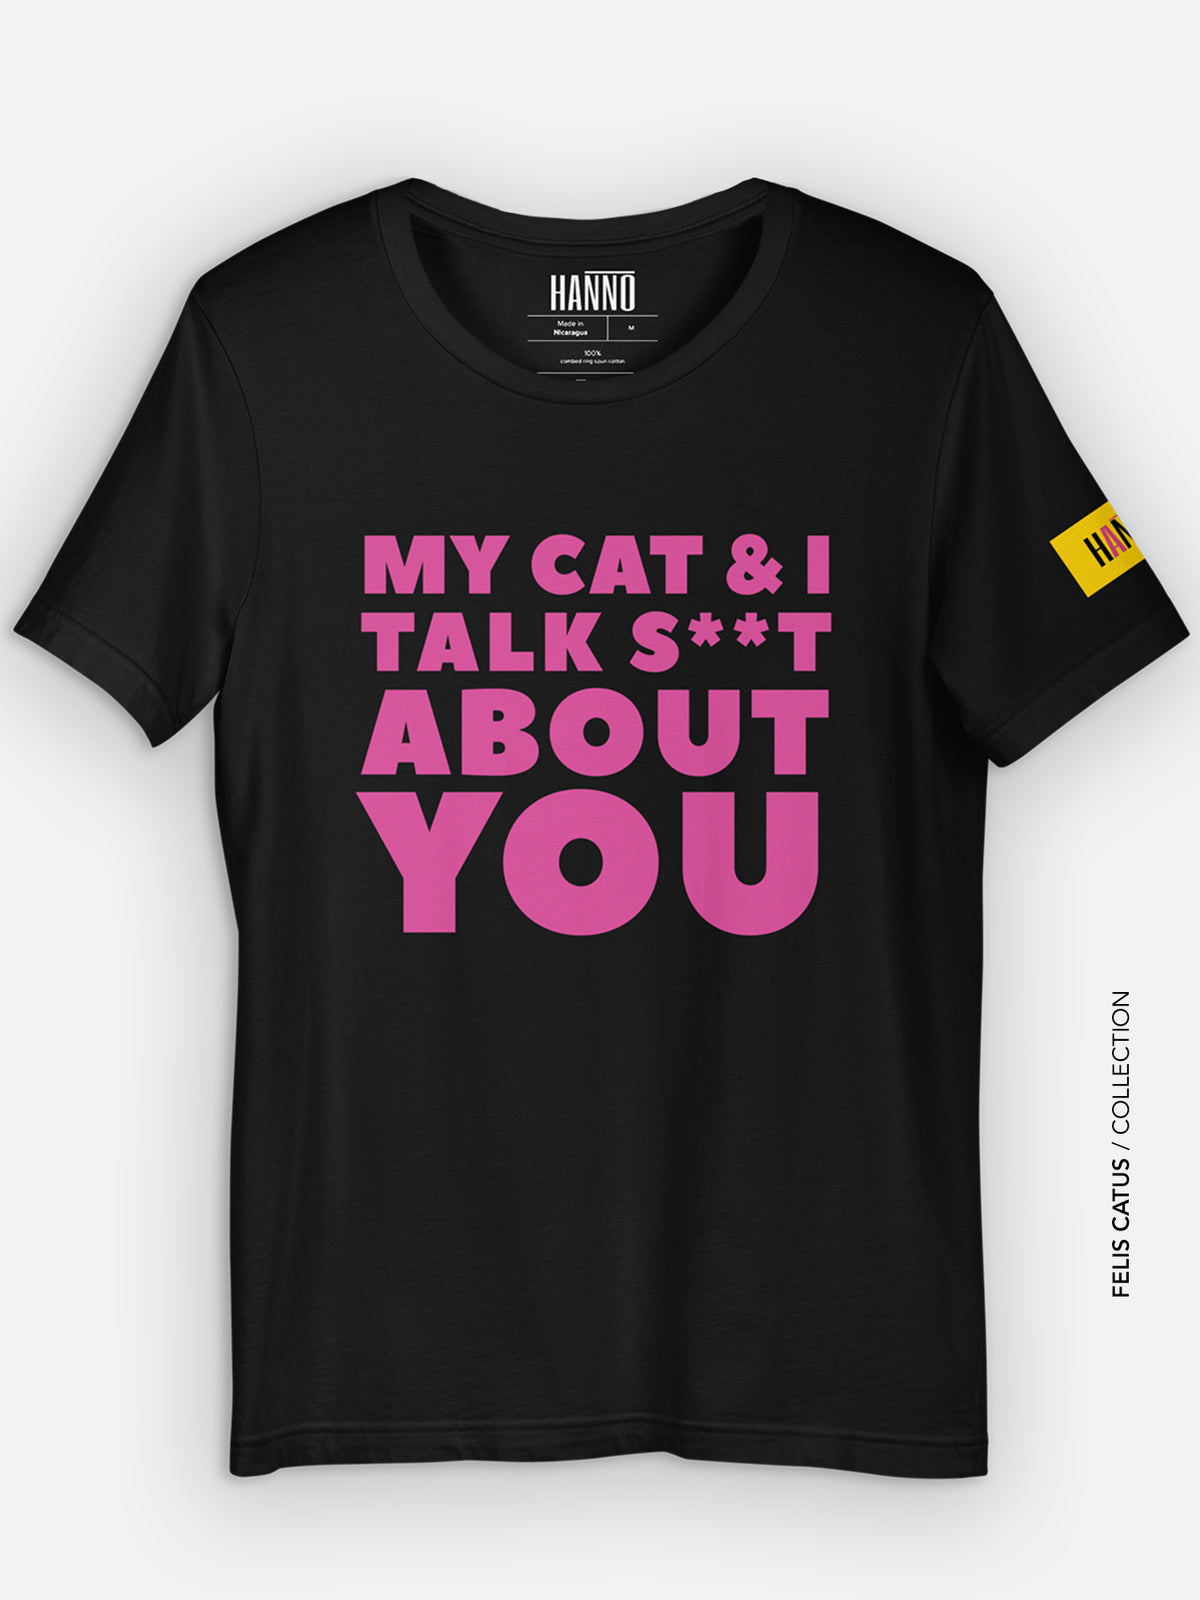 my cat and i talk shirt about you t shirt